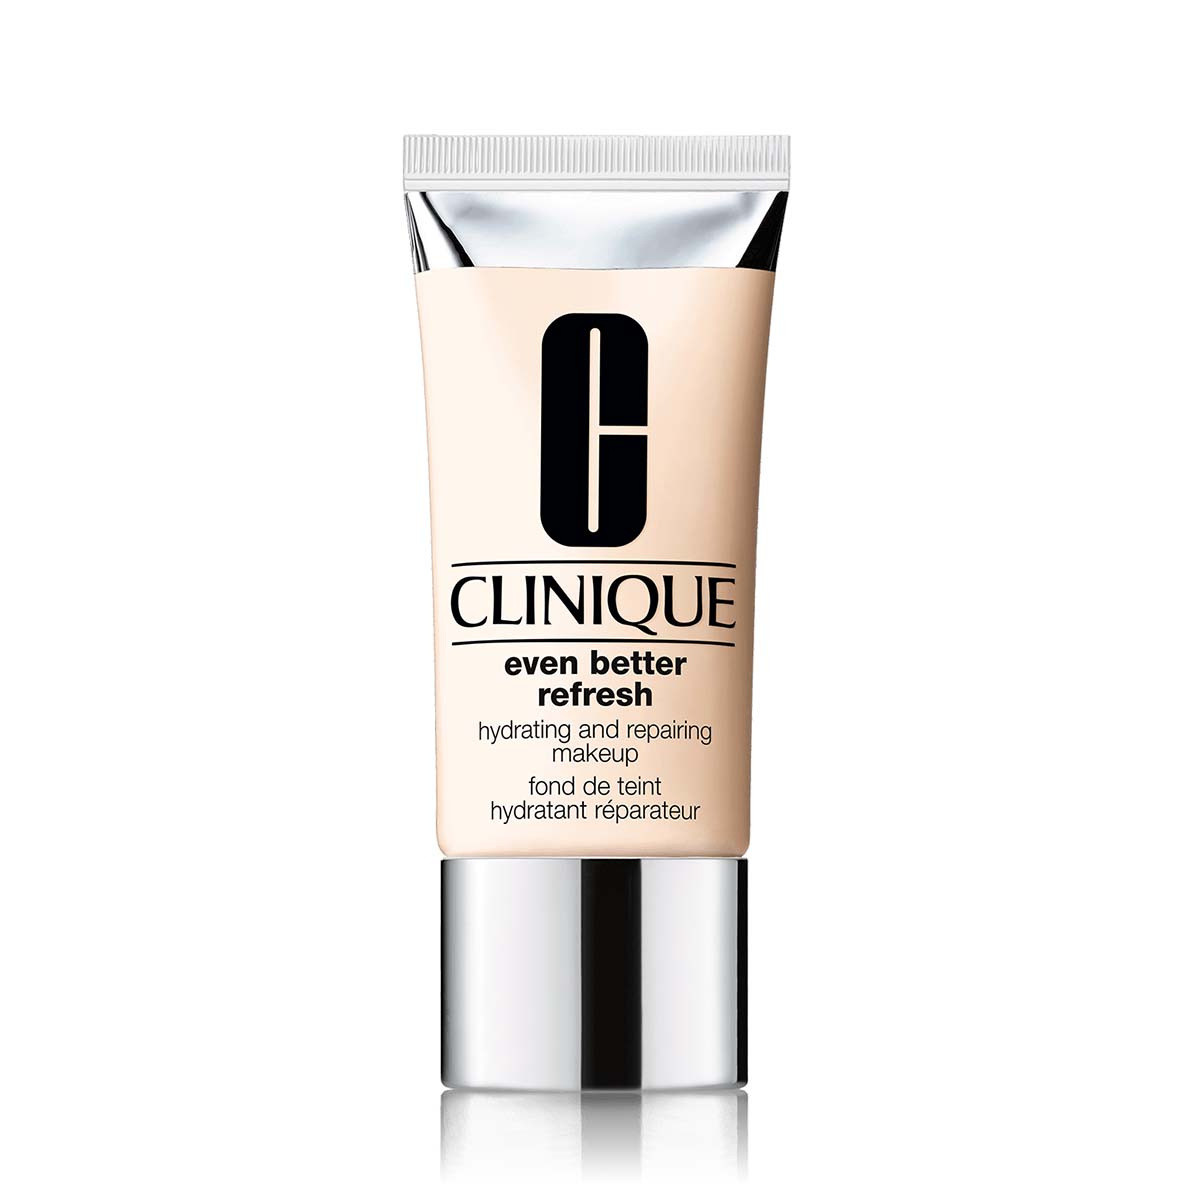 Clinique even better refresh - wn 01 flax 30 ml, WN 01 FLAX, large image number 0